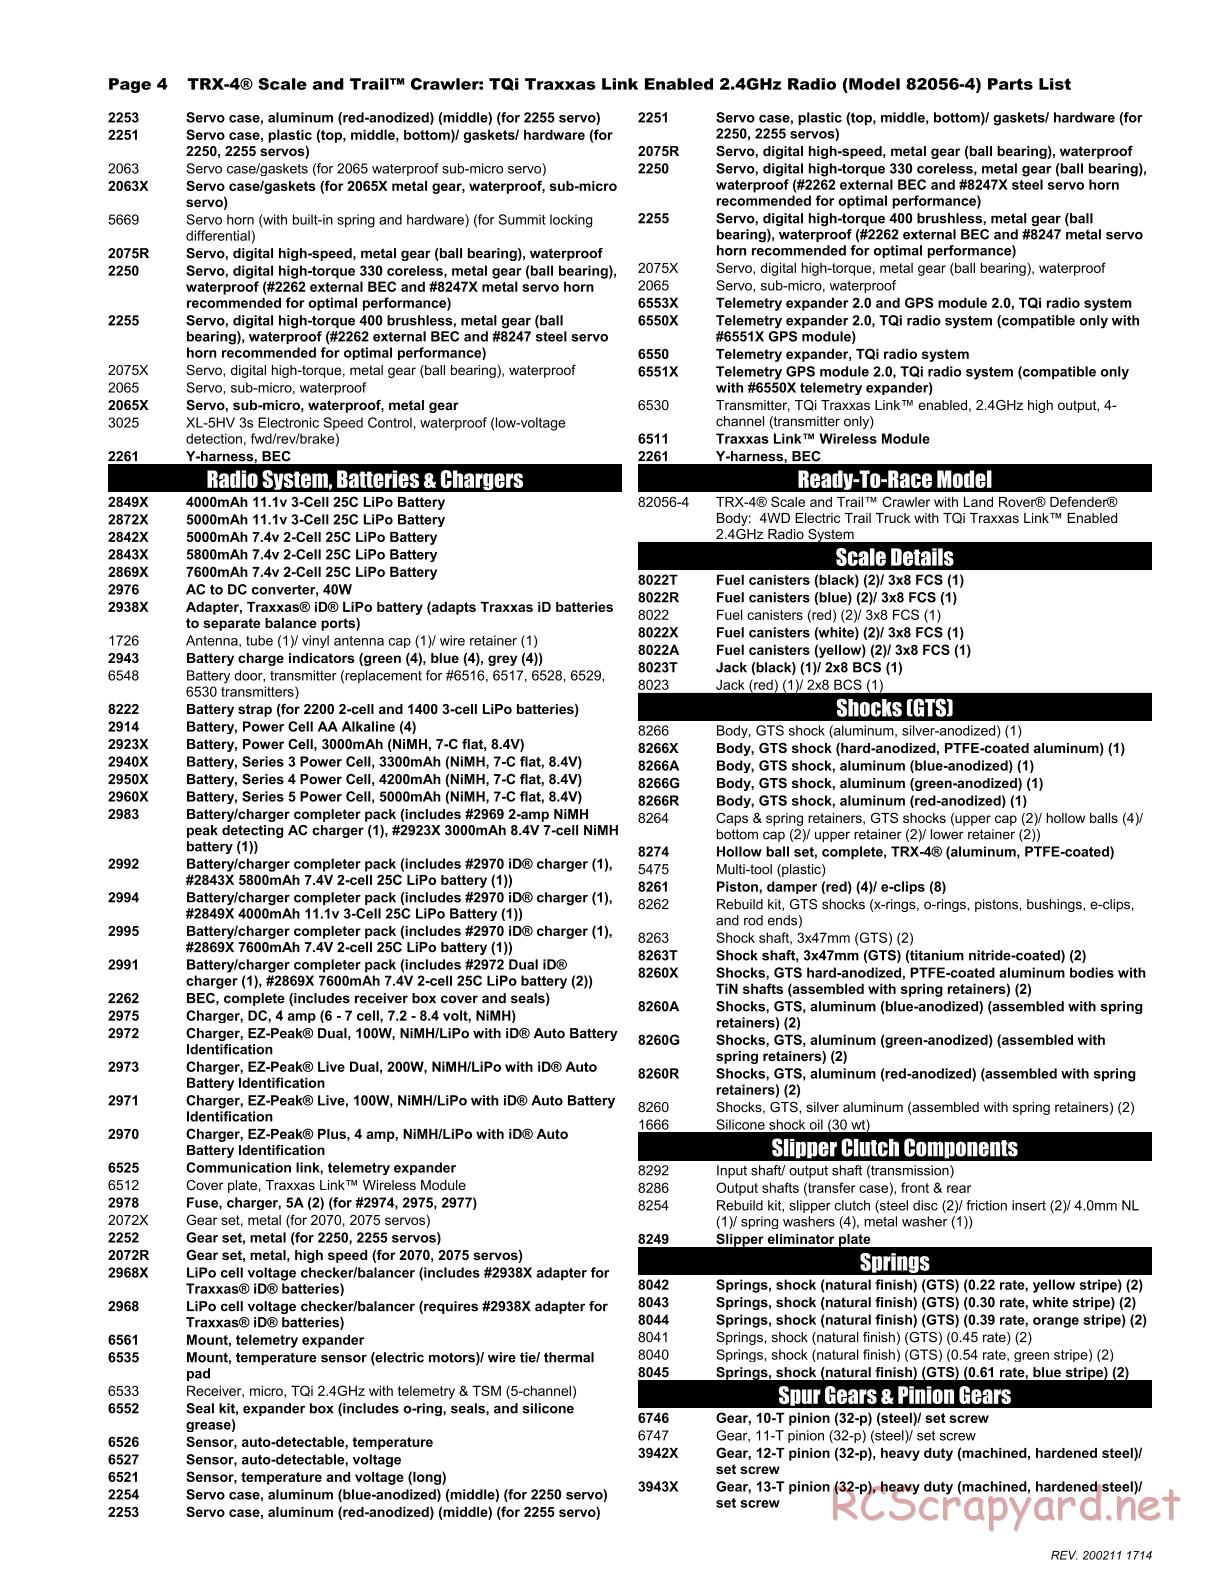 Traxxas - TRX-4 Land Rover Defender - Parts List - Page 4